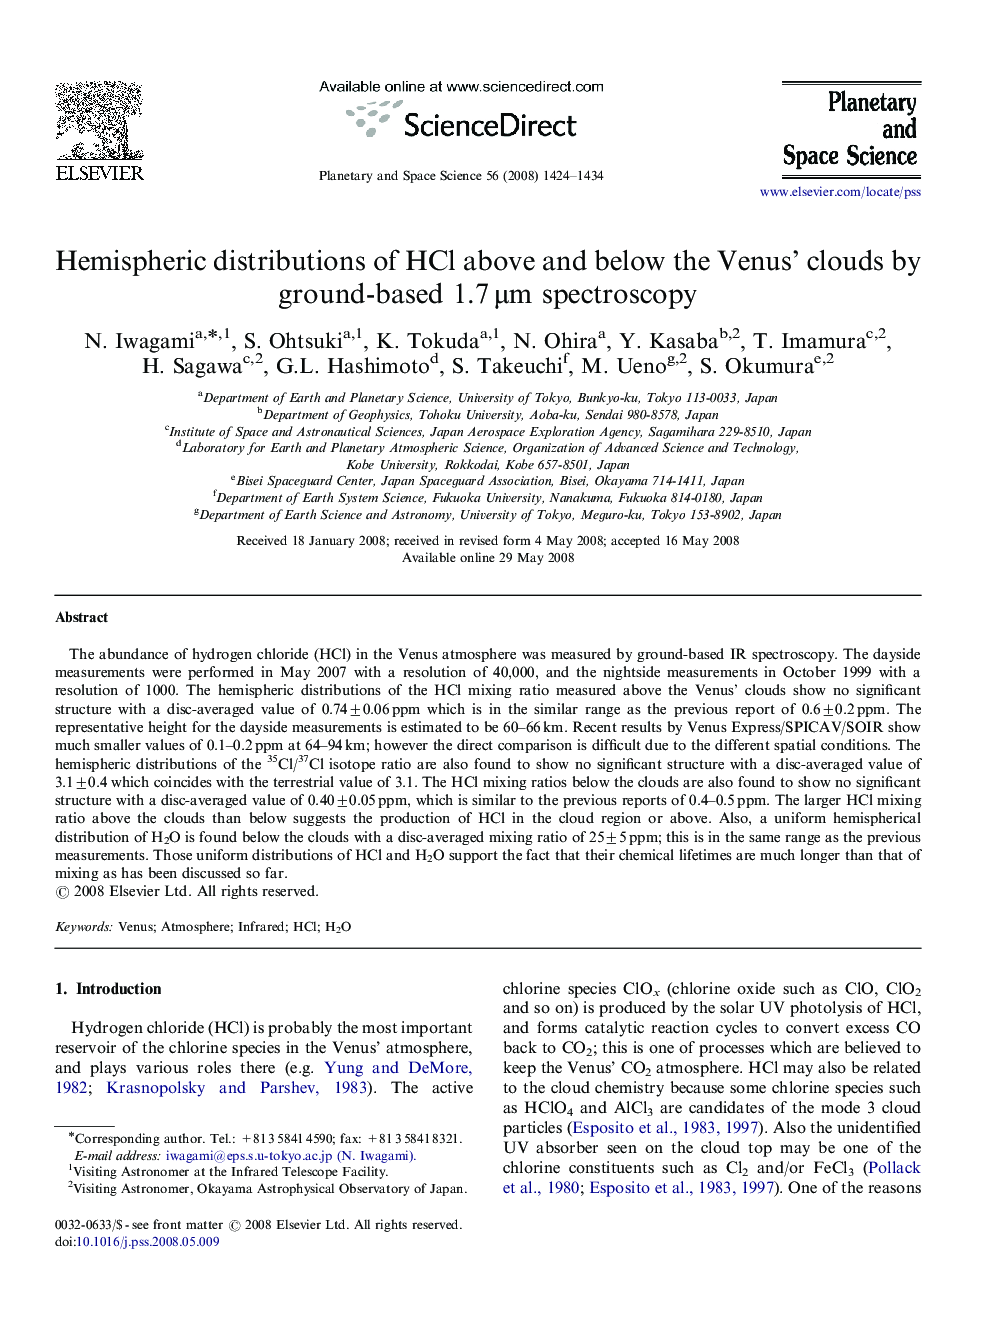 Hemispheric distributions of HCl above and below the Venus’ clouds by ground-based 1.7 μm spectroscopy